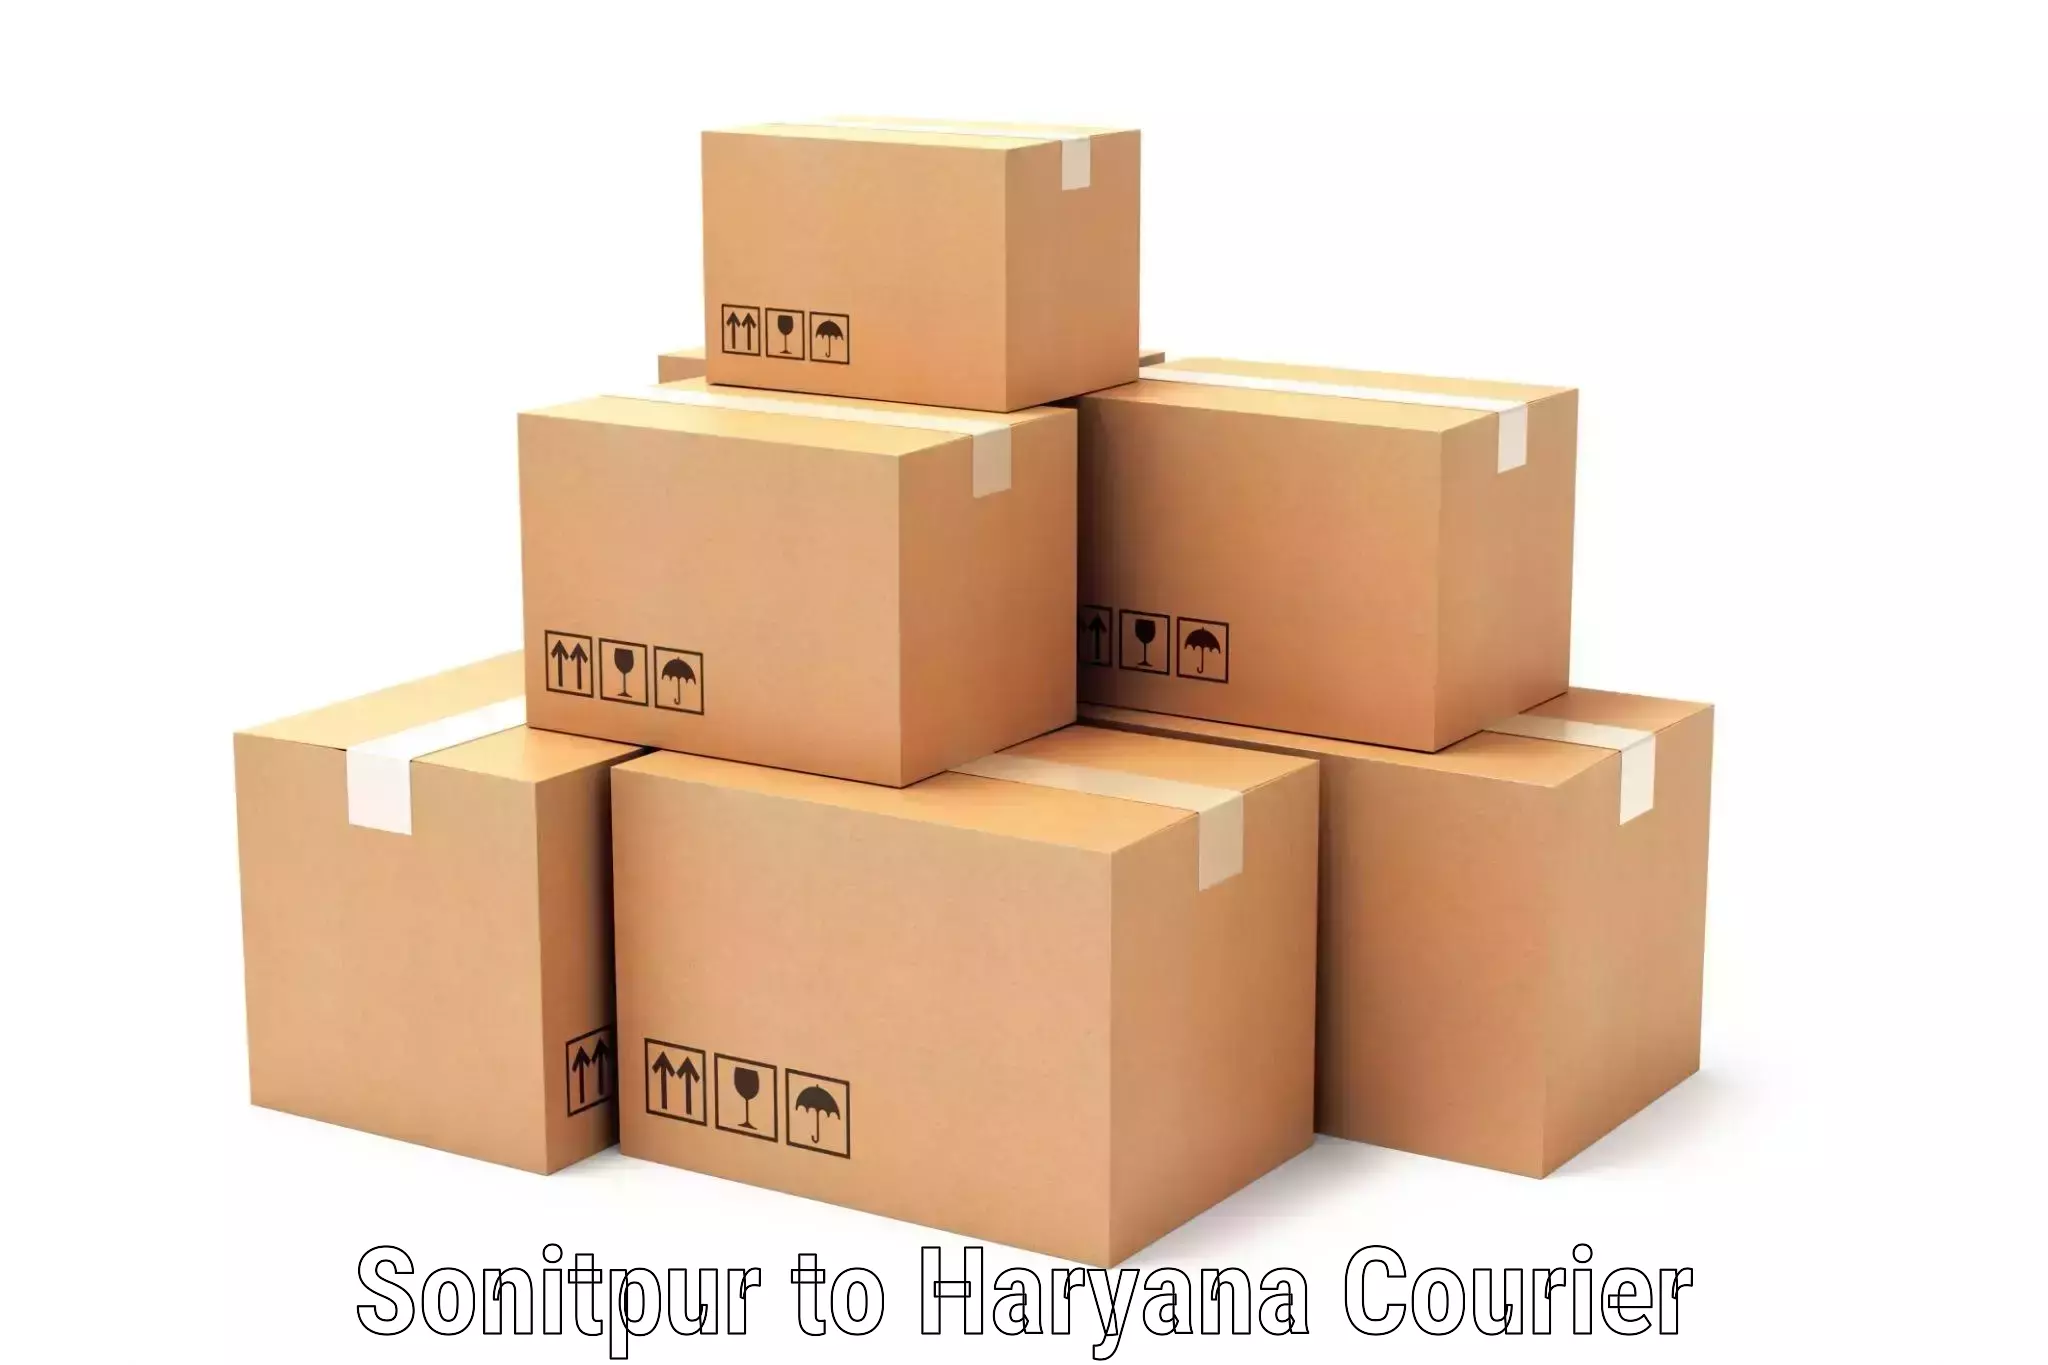 State-of-the-art courier technology Sonitpur to Haryana